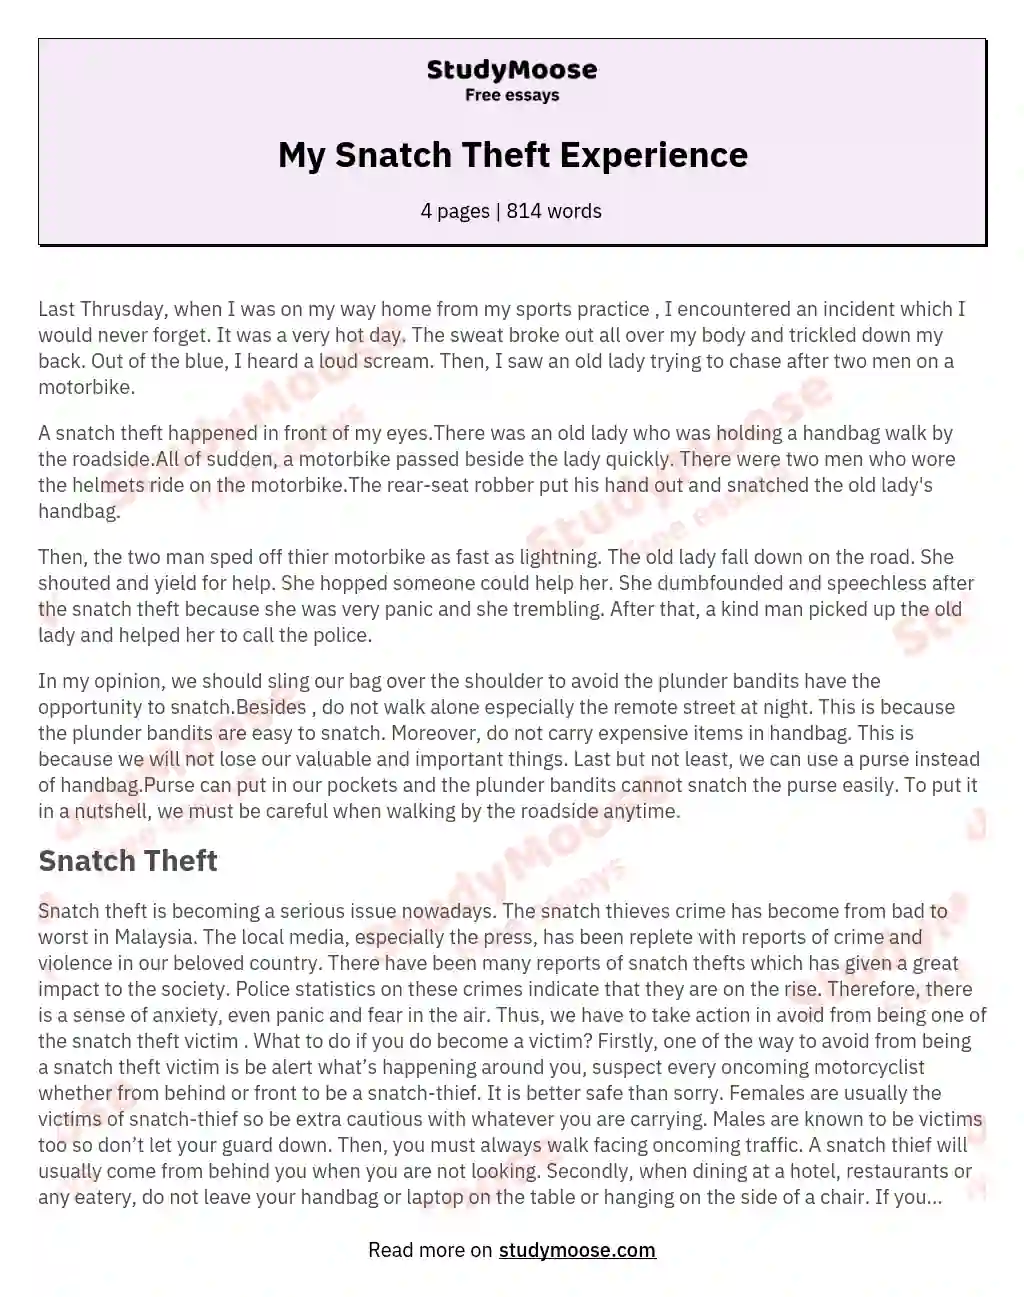 My Snatch Theft Experience